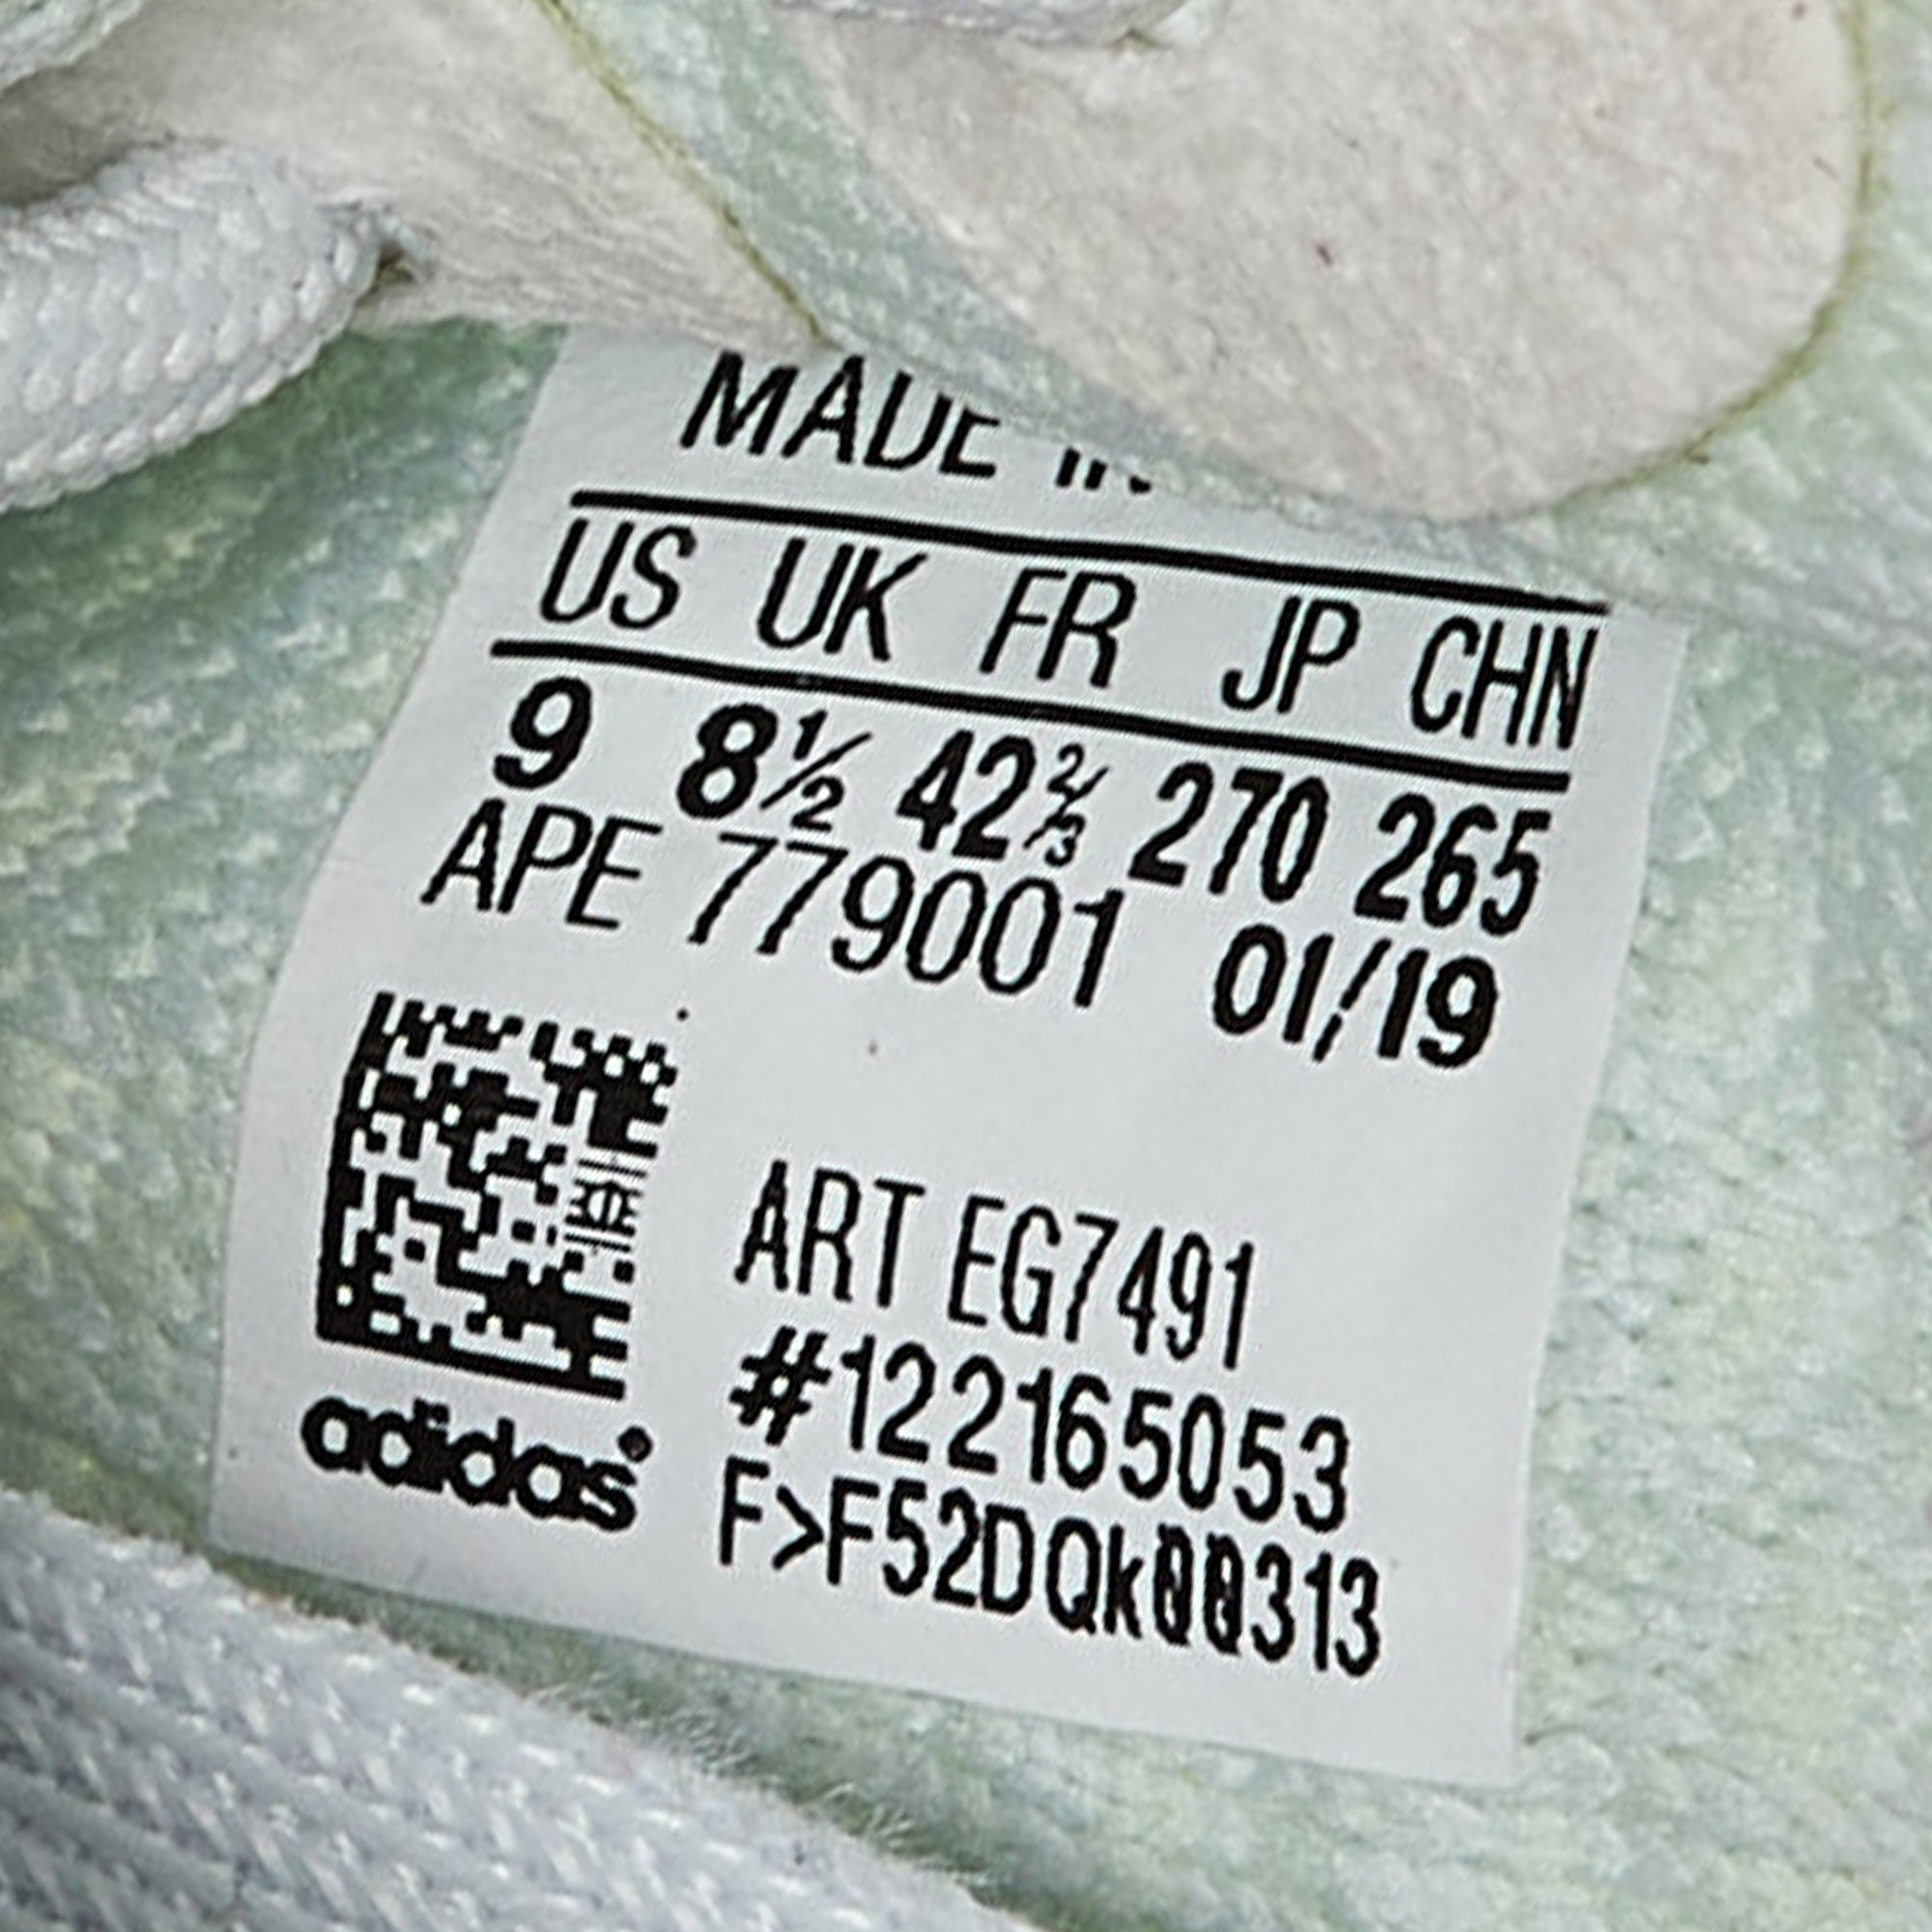 Yeezy X Adidas Mint Green Knit Fabric Boost 350 V2 Hyperspace Sneakers Size 42 2/3